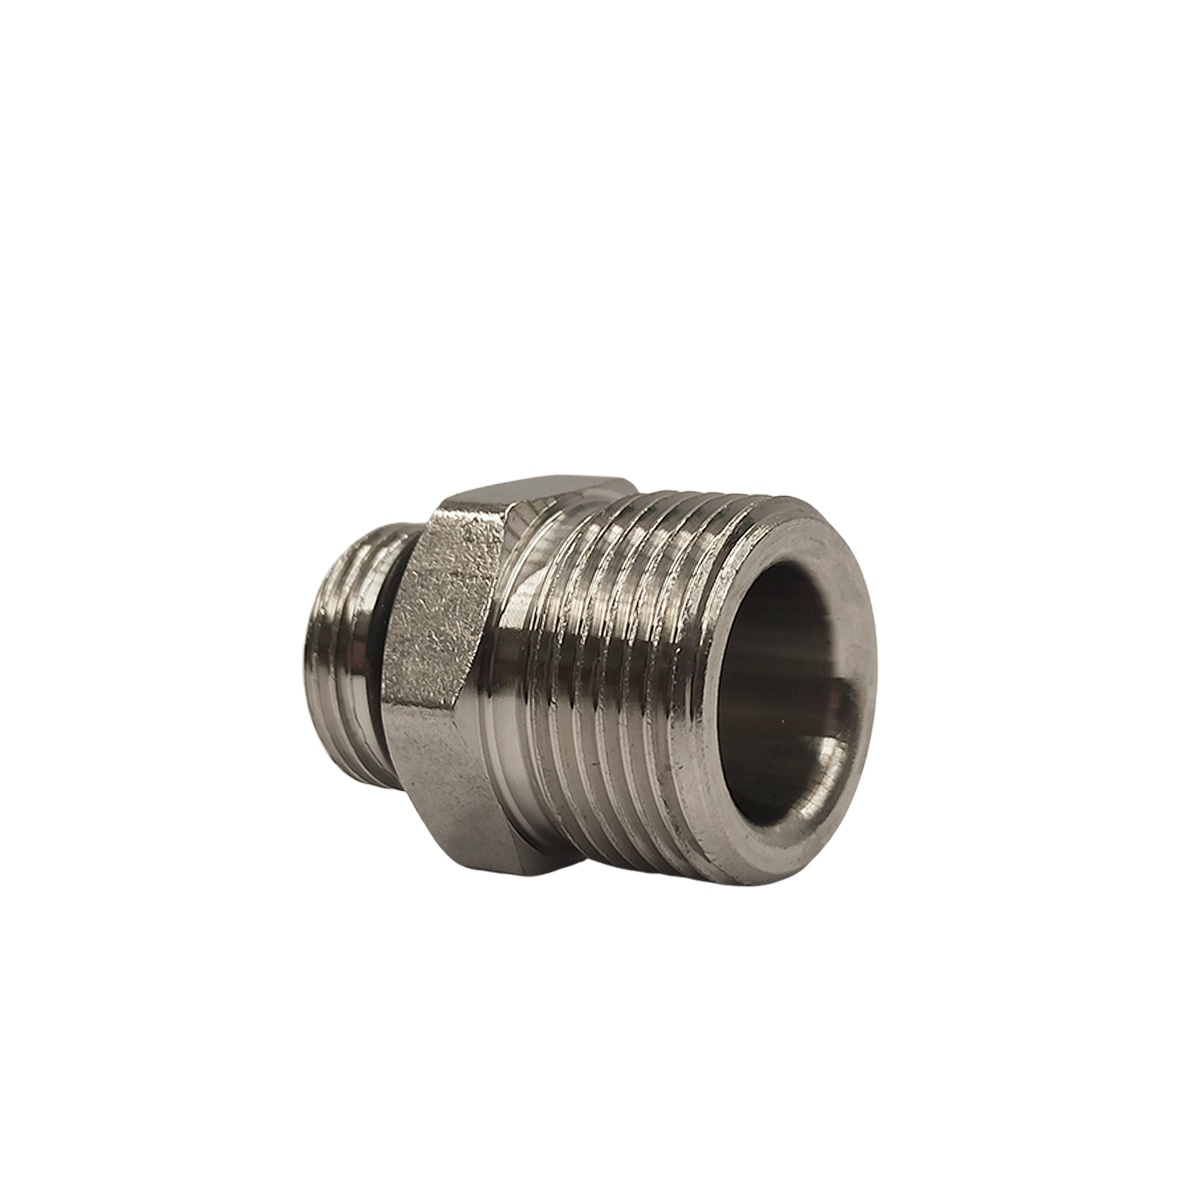 Conector He M22 X M14 X 3/8